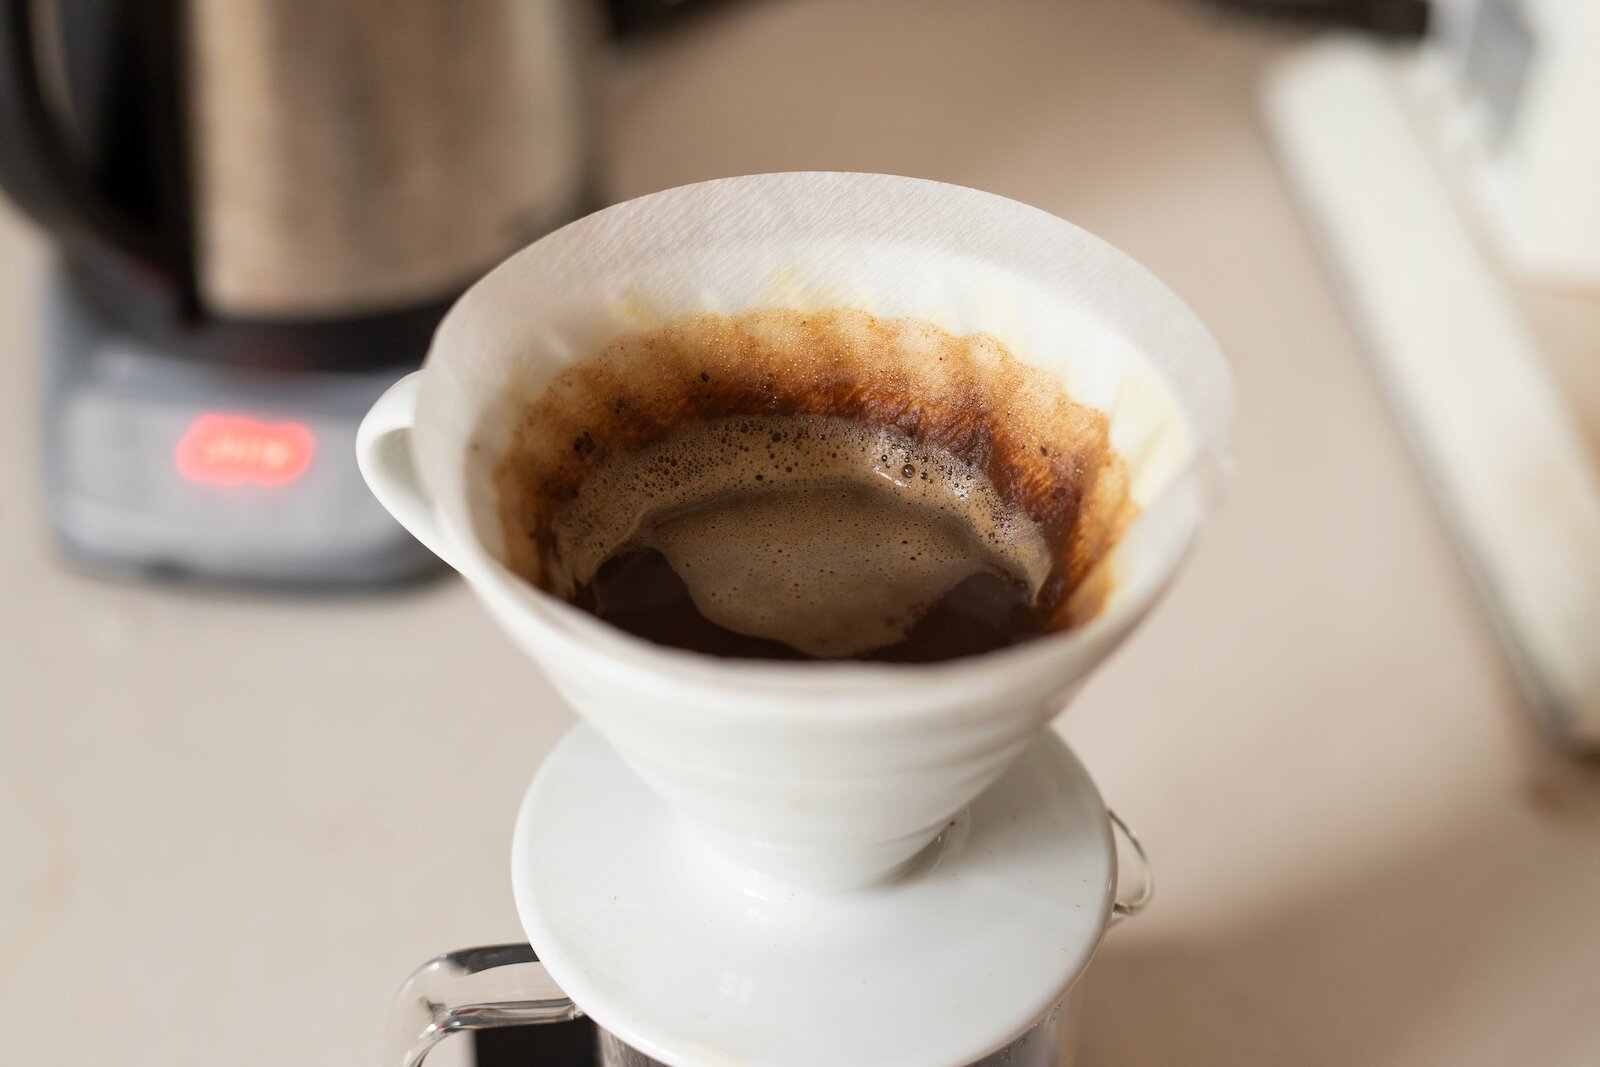 A pour over coffee involves manually pouring hot water through coffee grounds in a filter.